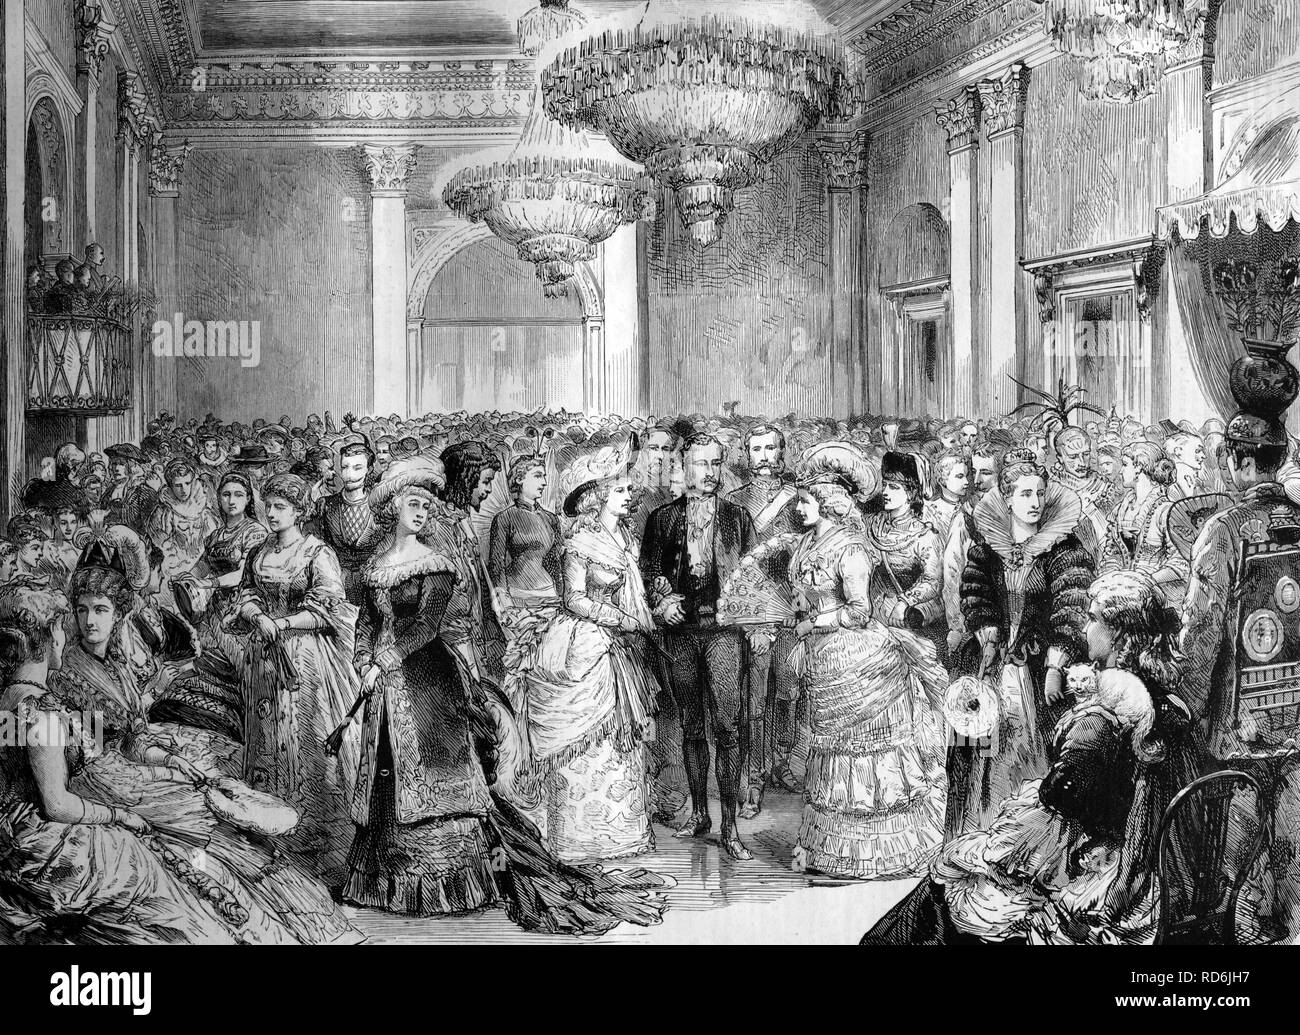 Fancy dress ball given by the mayor of Liverpool in the town hall, England, historical illustration, 1884 Stock Photo